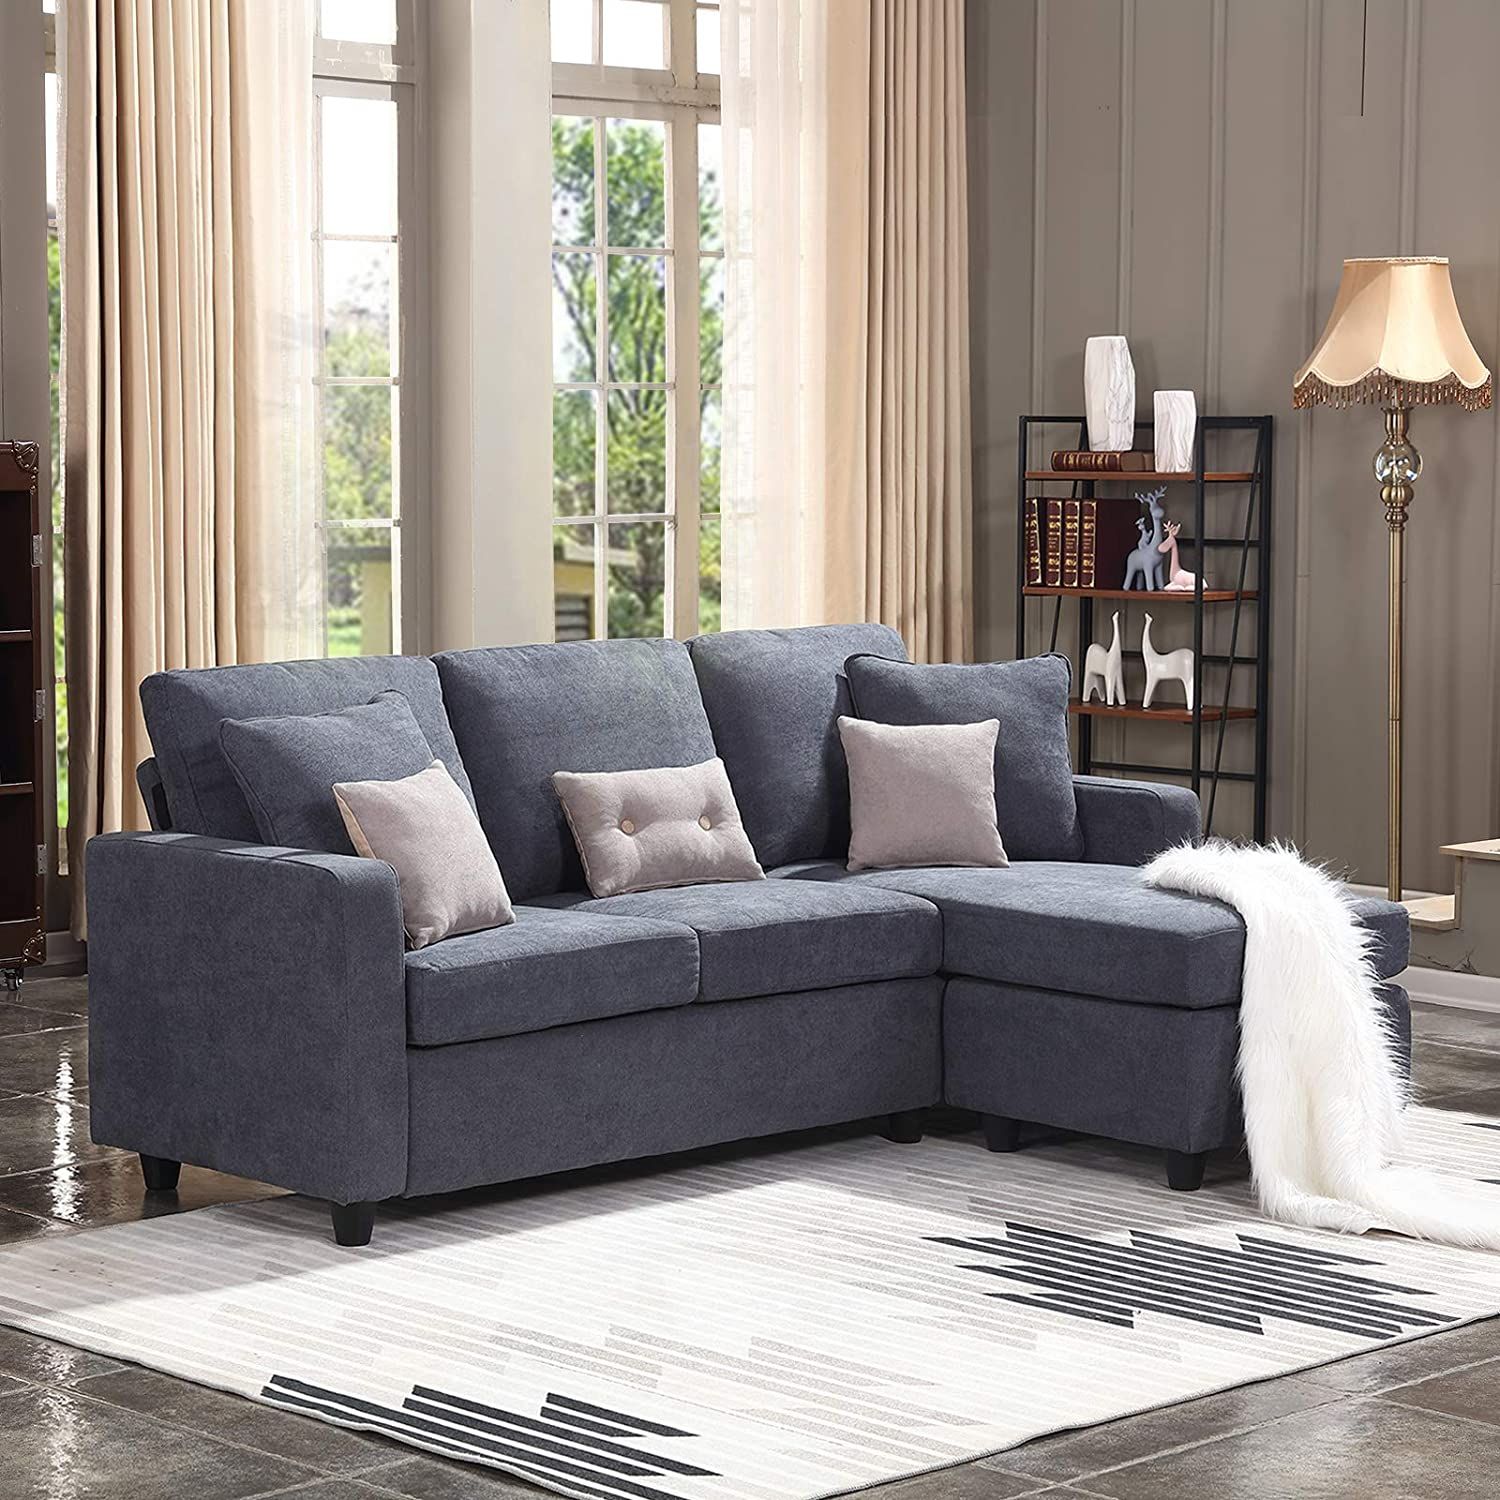 Honbay Convertible L Shaped Sectional Sofa Couch | Sbw Intended For Convertible L Shaped Sectional Sofas (View 16 of 24)